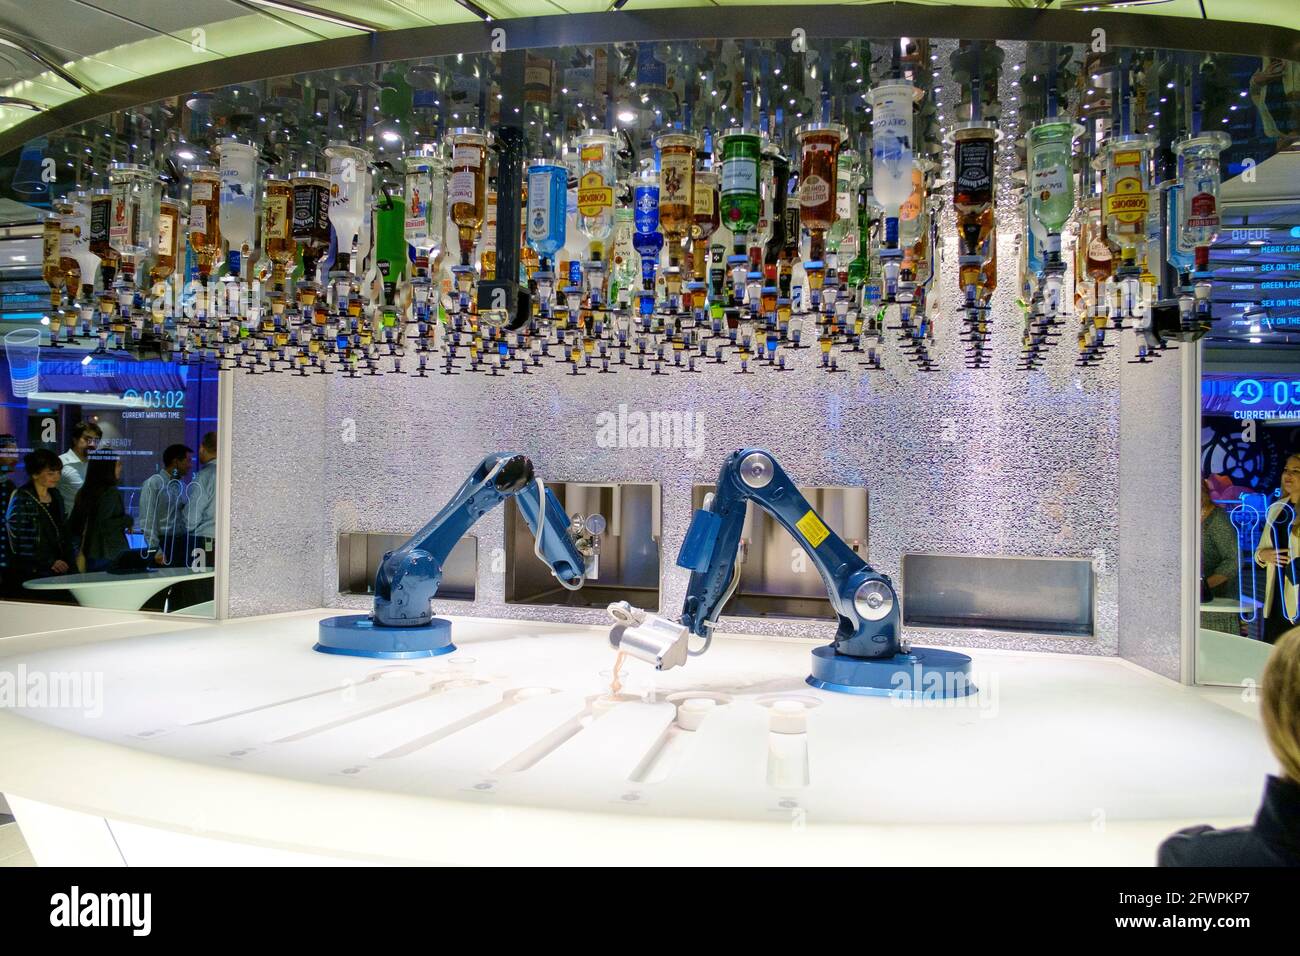 The Bionic Bar on Board the Royal Caribbean ship Anthem of the Seas. The Robotic bartenders mix and serve cocktails to guests. Stock Photo